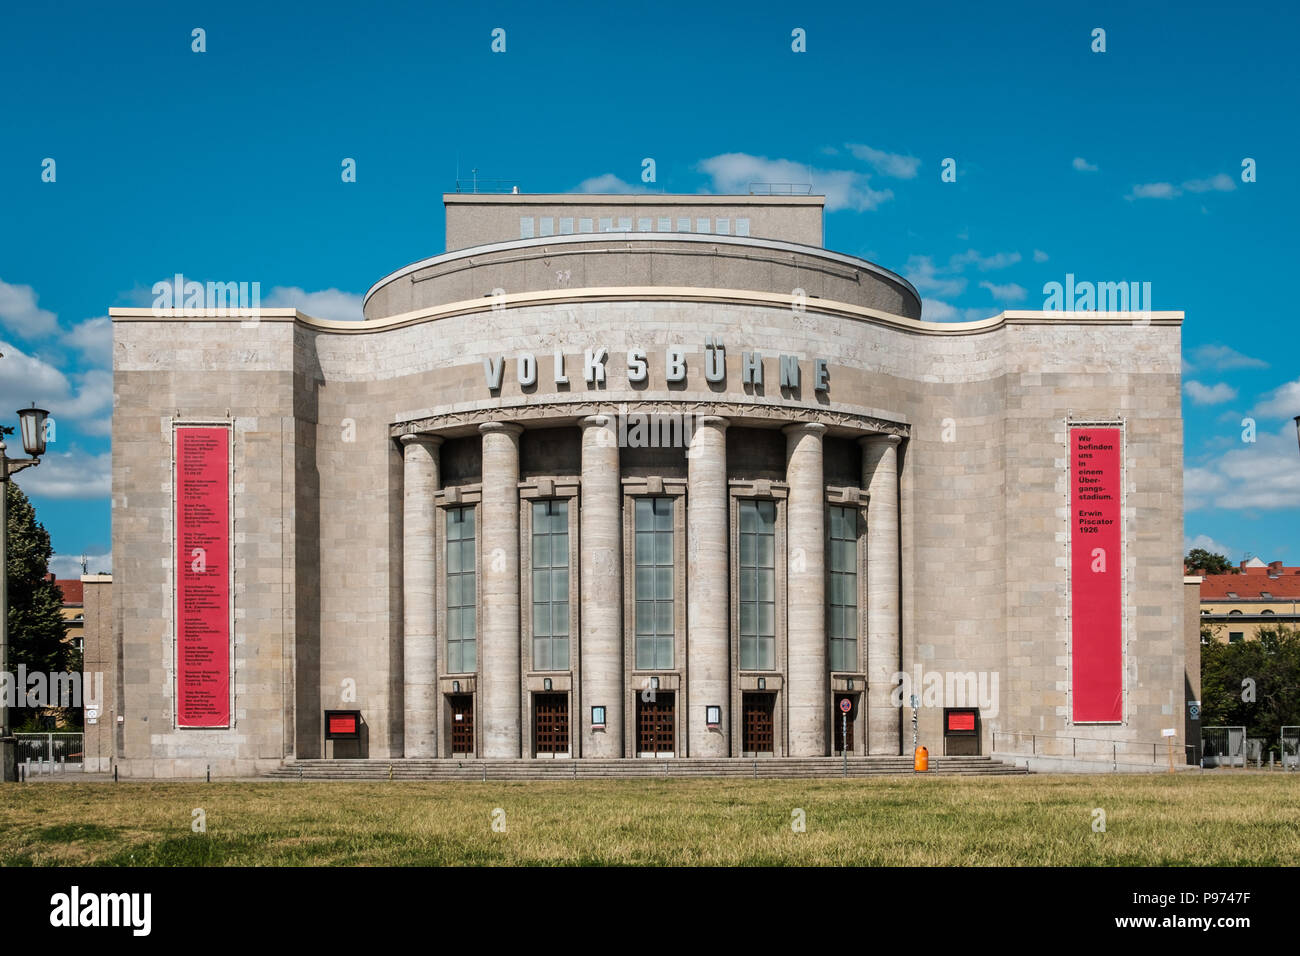 Berlin, Germany - july 2018:   The facade of the Volksbuehne ('People's Theatre') at Rosa Luxemburg Platz in Berlin Mitte, Germany Stock Photo